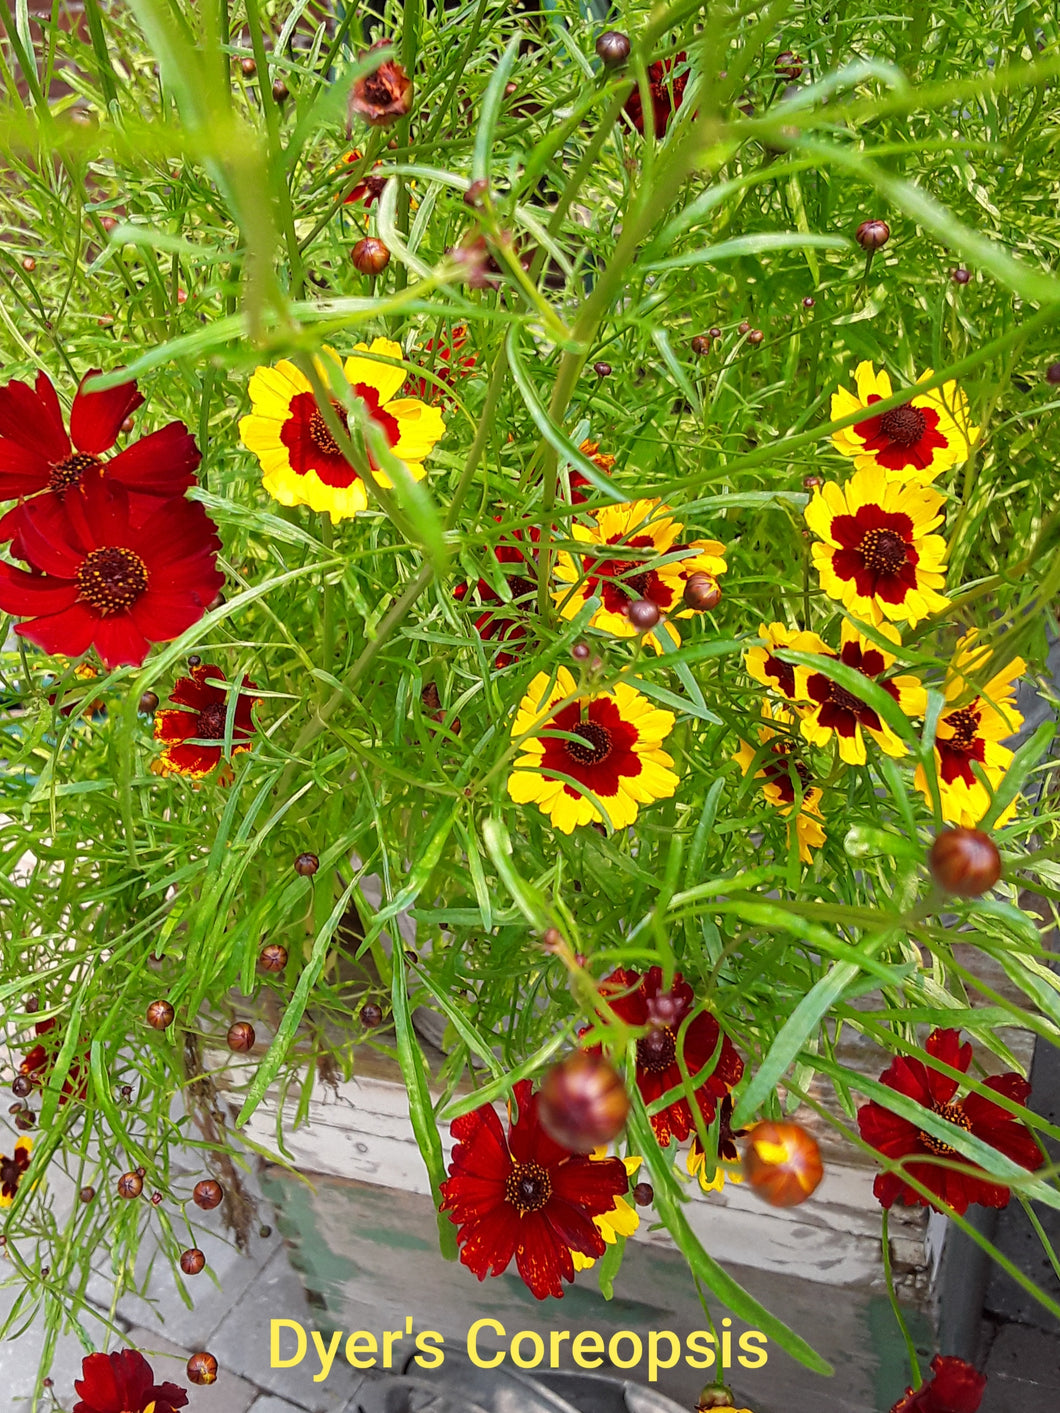 Dyer's Coreopsis - seeds